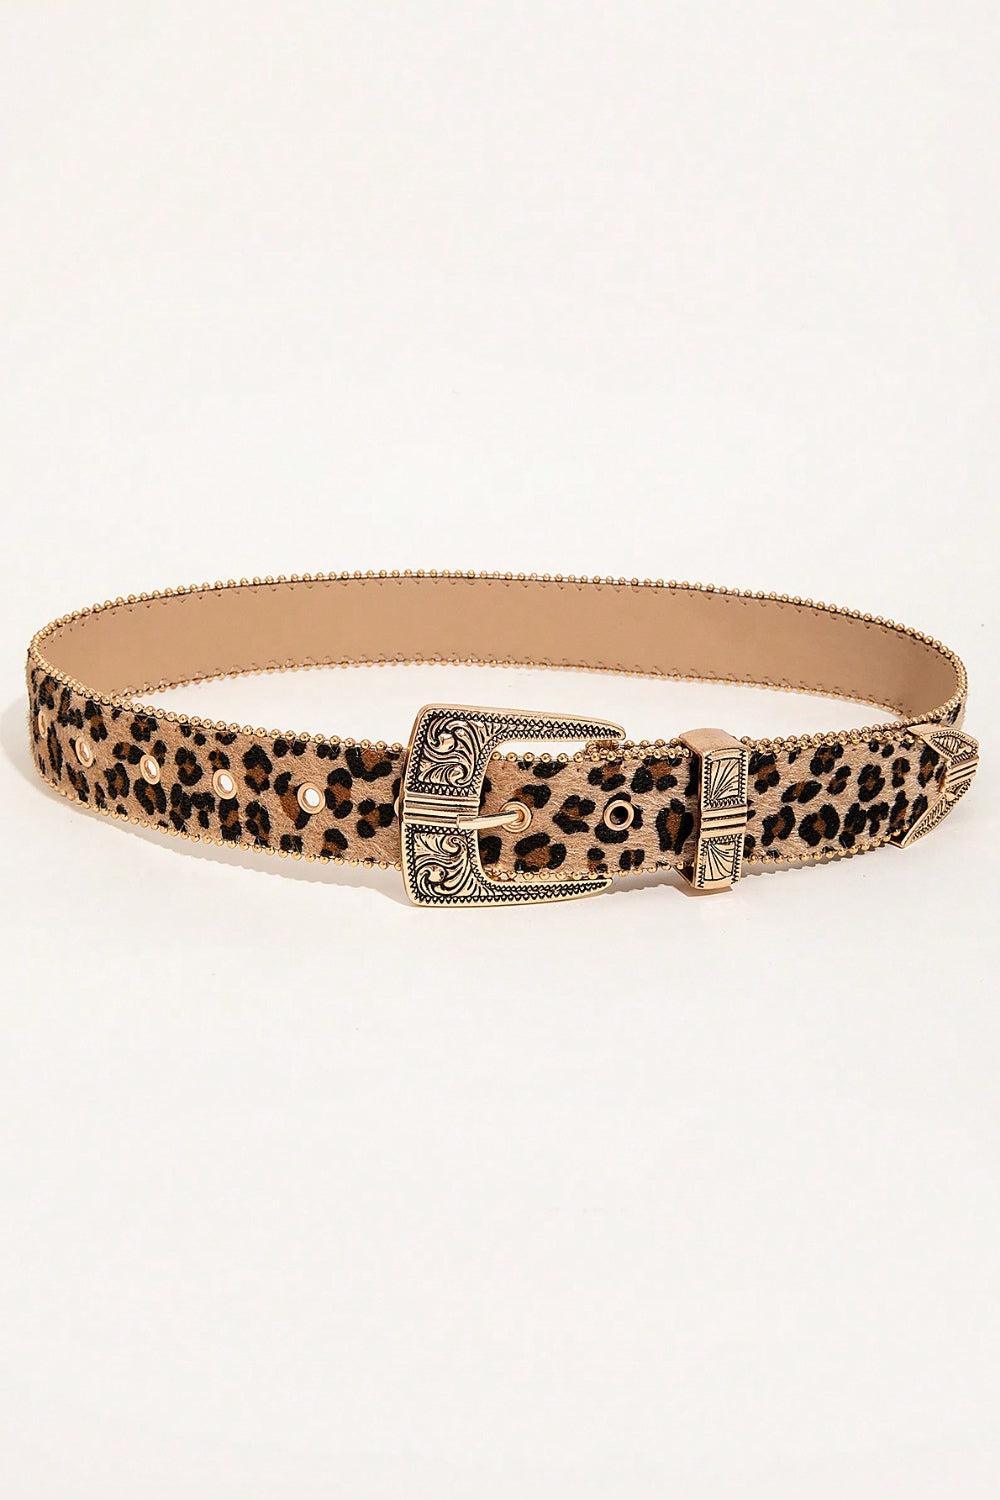 a leopard print belt with a metal buckle